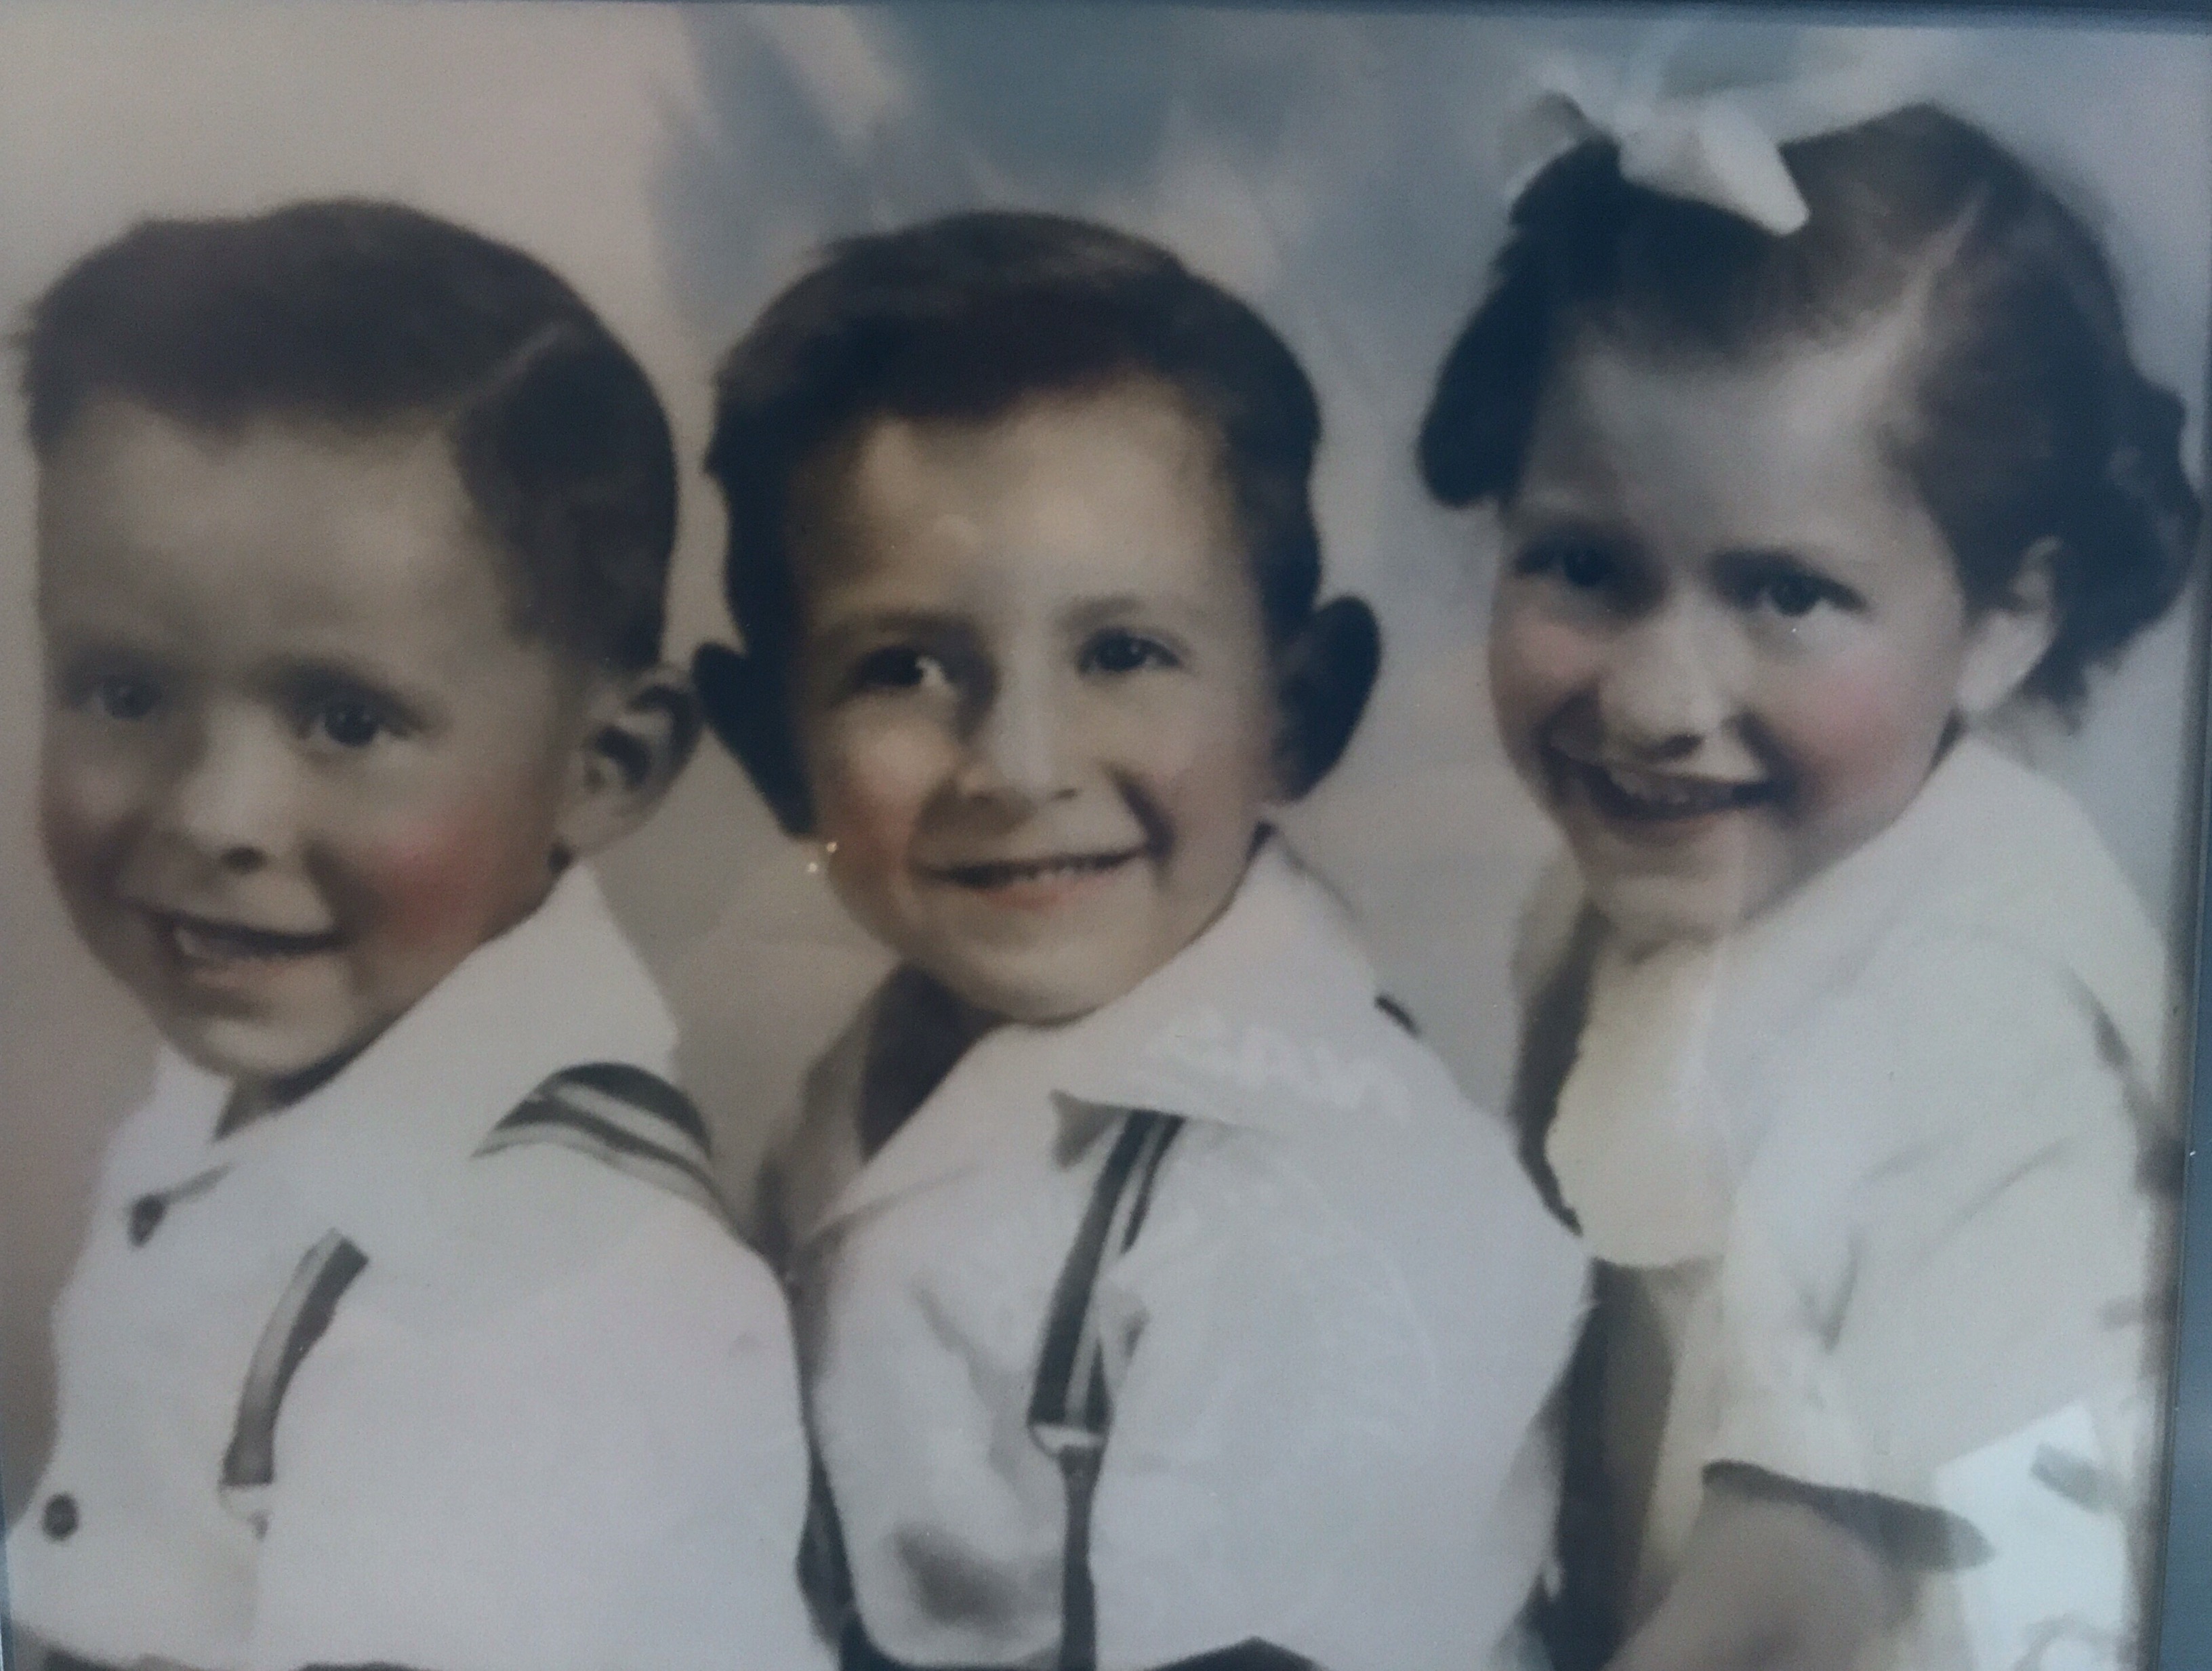 Jerry, Danny, and Aileen 1947